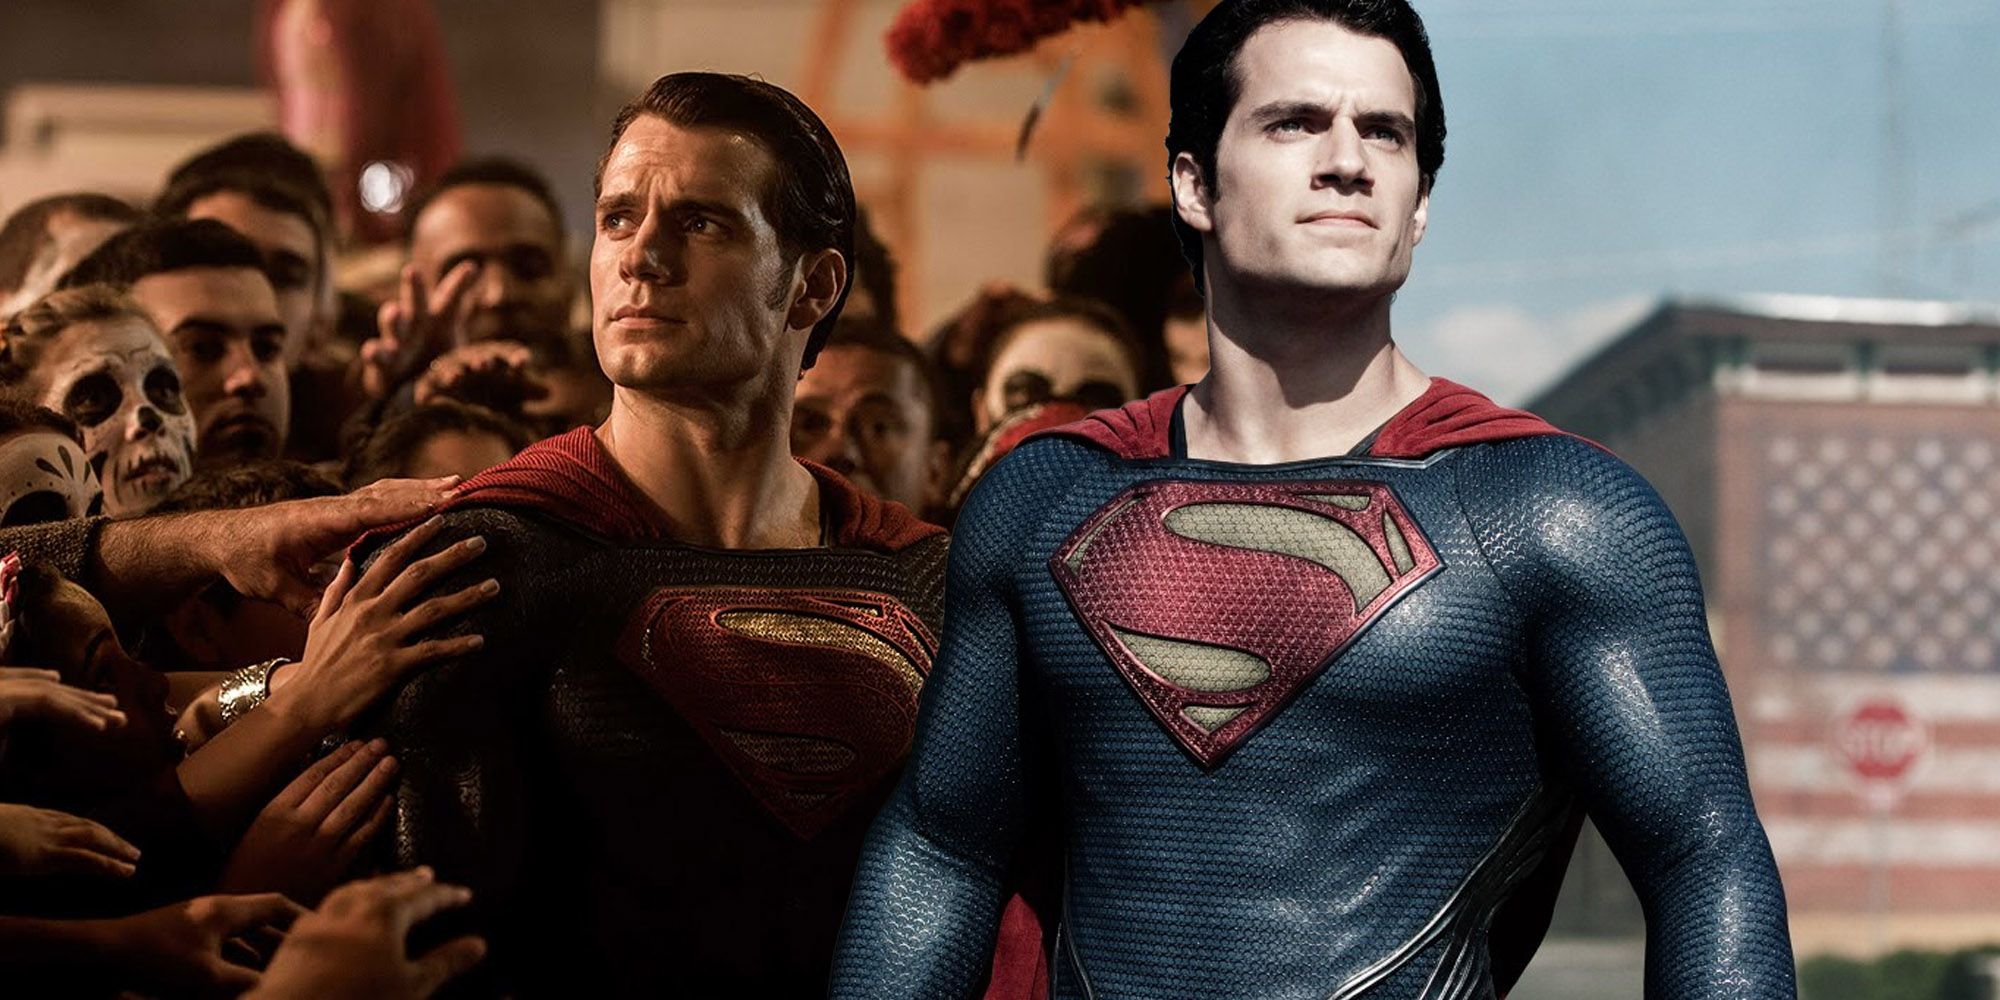 How Zack Snyders Justice League Sequels Were Different From His Other DC Films